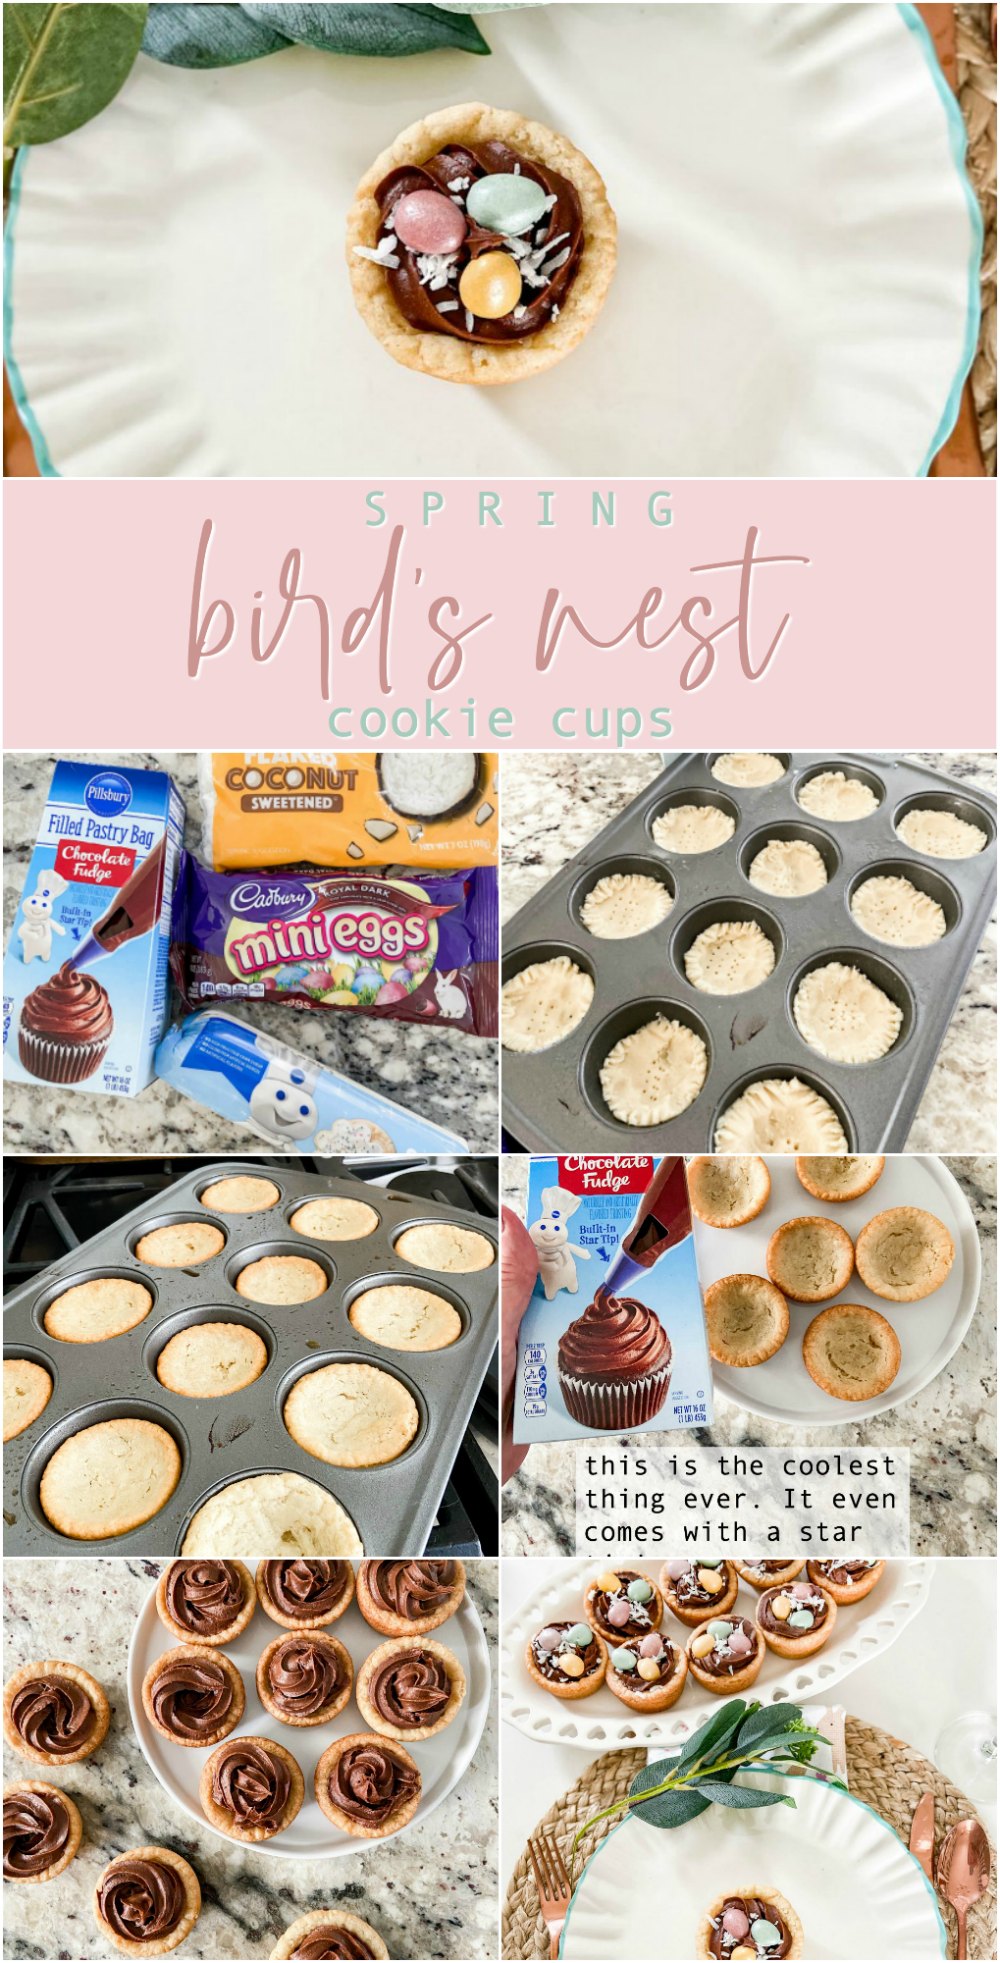 Bird's Nest Cookie Cups are fun to make and are the perfect dessert to make for Spring or Easter. Make them with your kids in three easy steps!